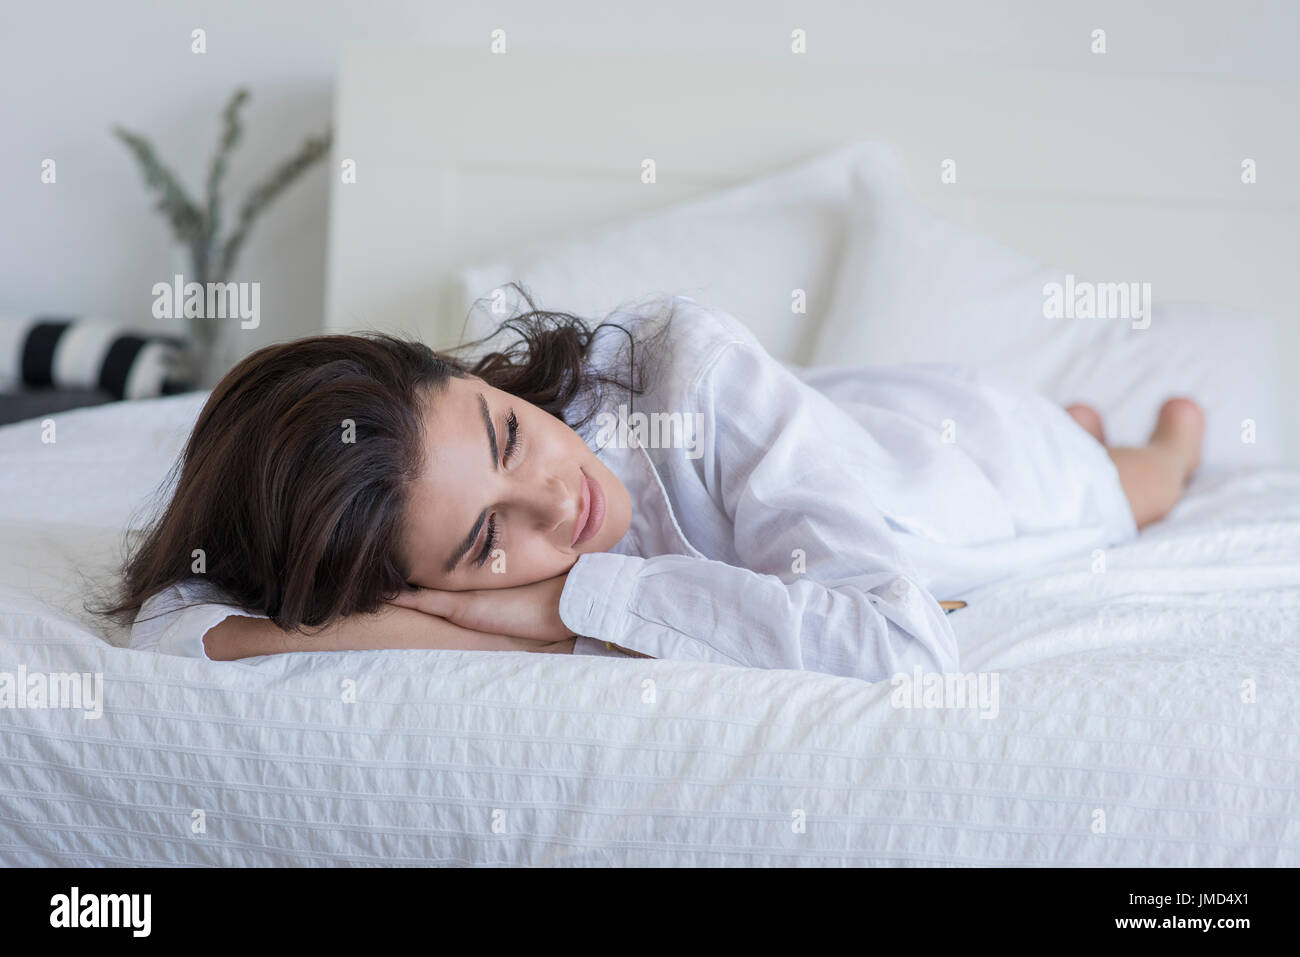 Young woman lying on bed portant une chemise blanche. Banque D'Images